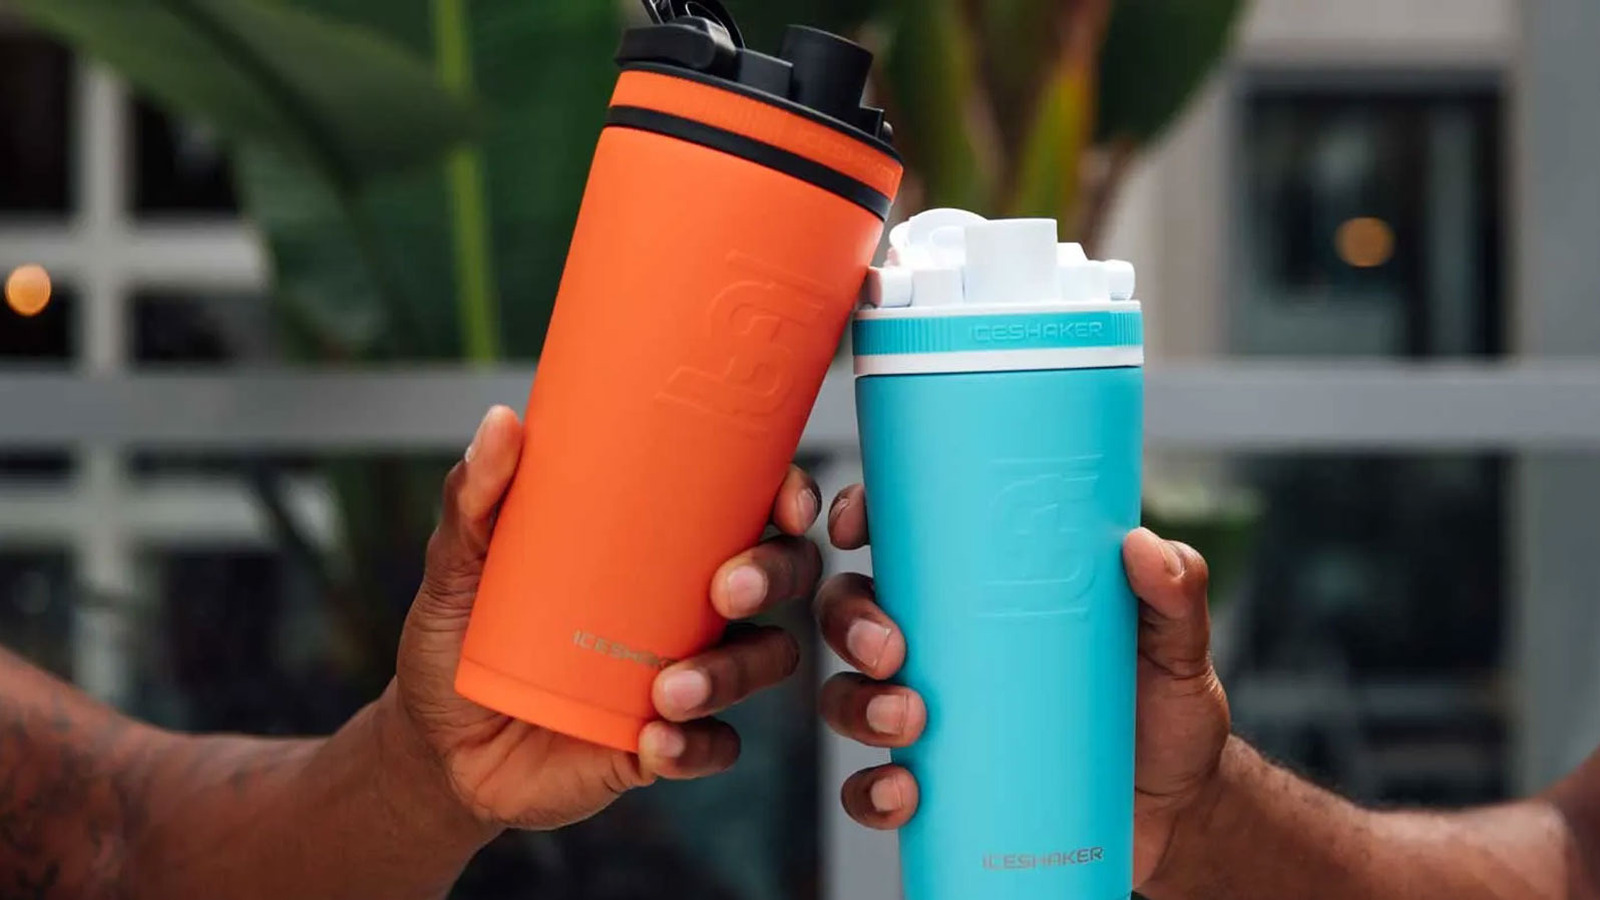 Ice Shaker - Insulated Water Bottle & Shaker Cup - GET AFTER IT